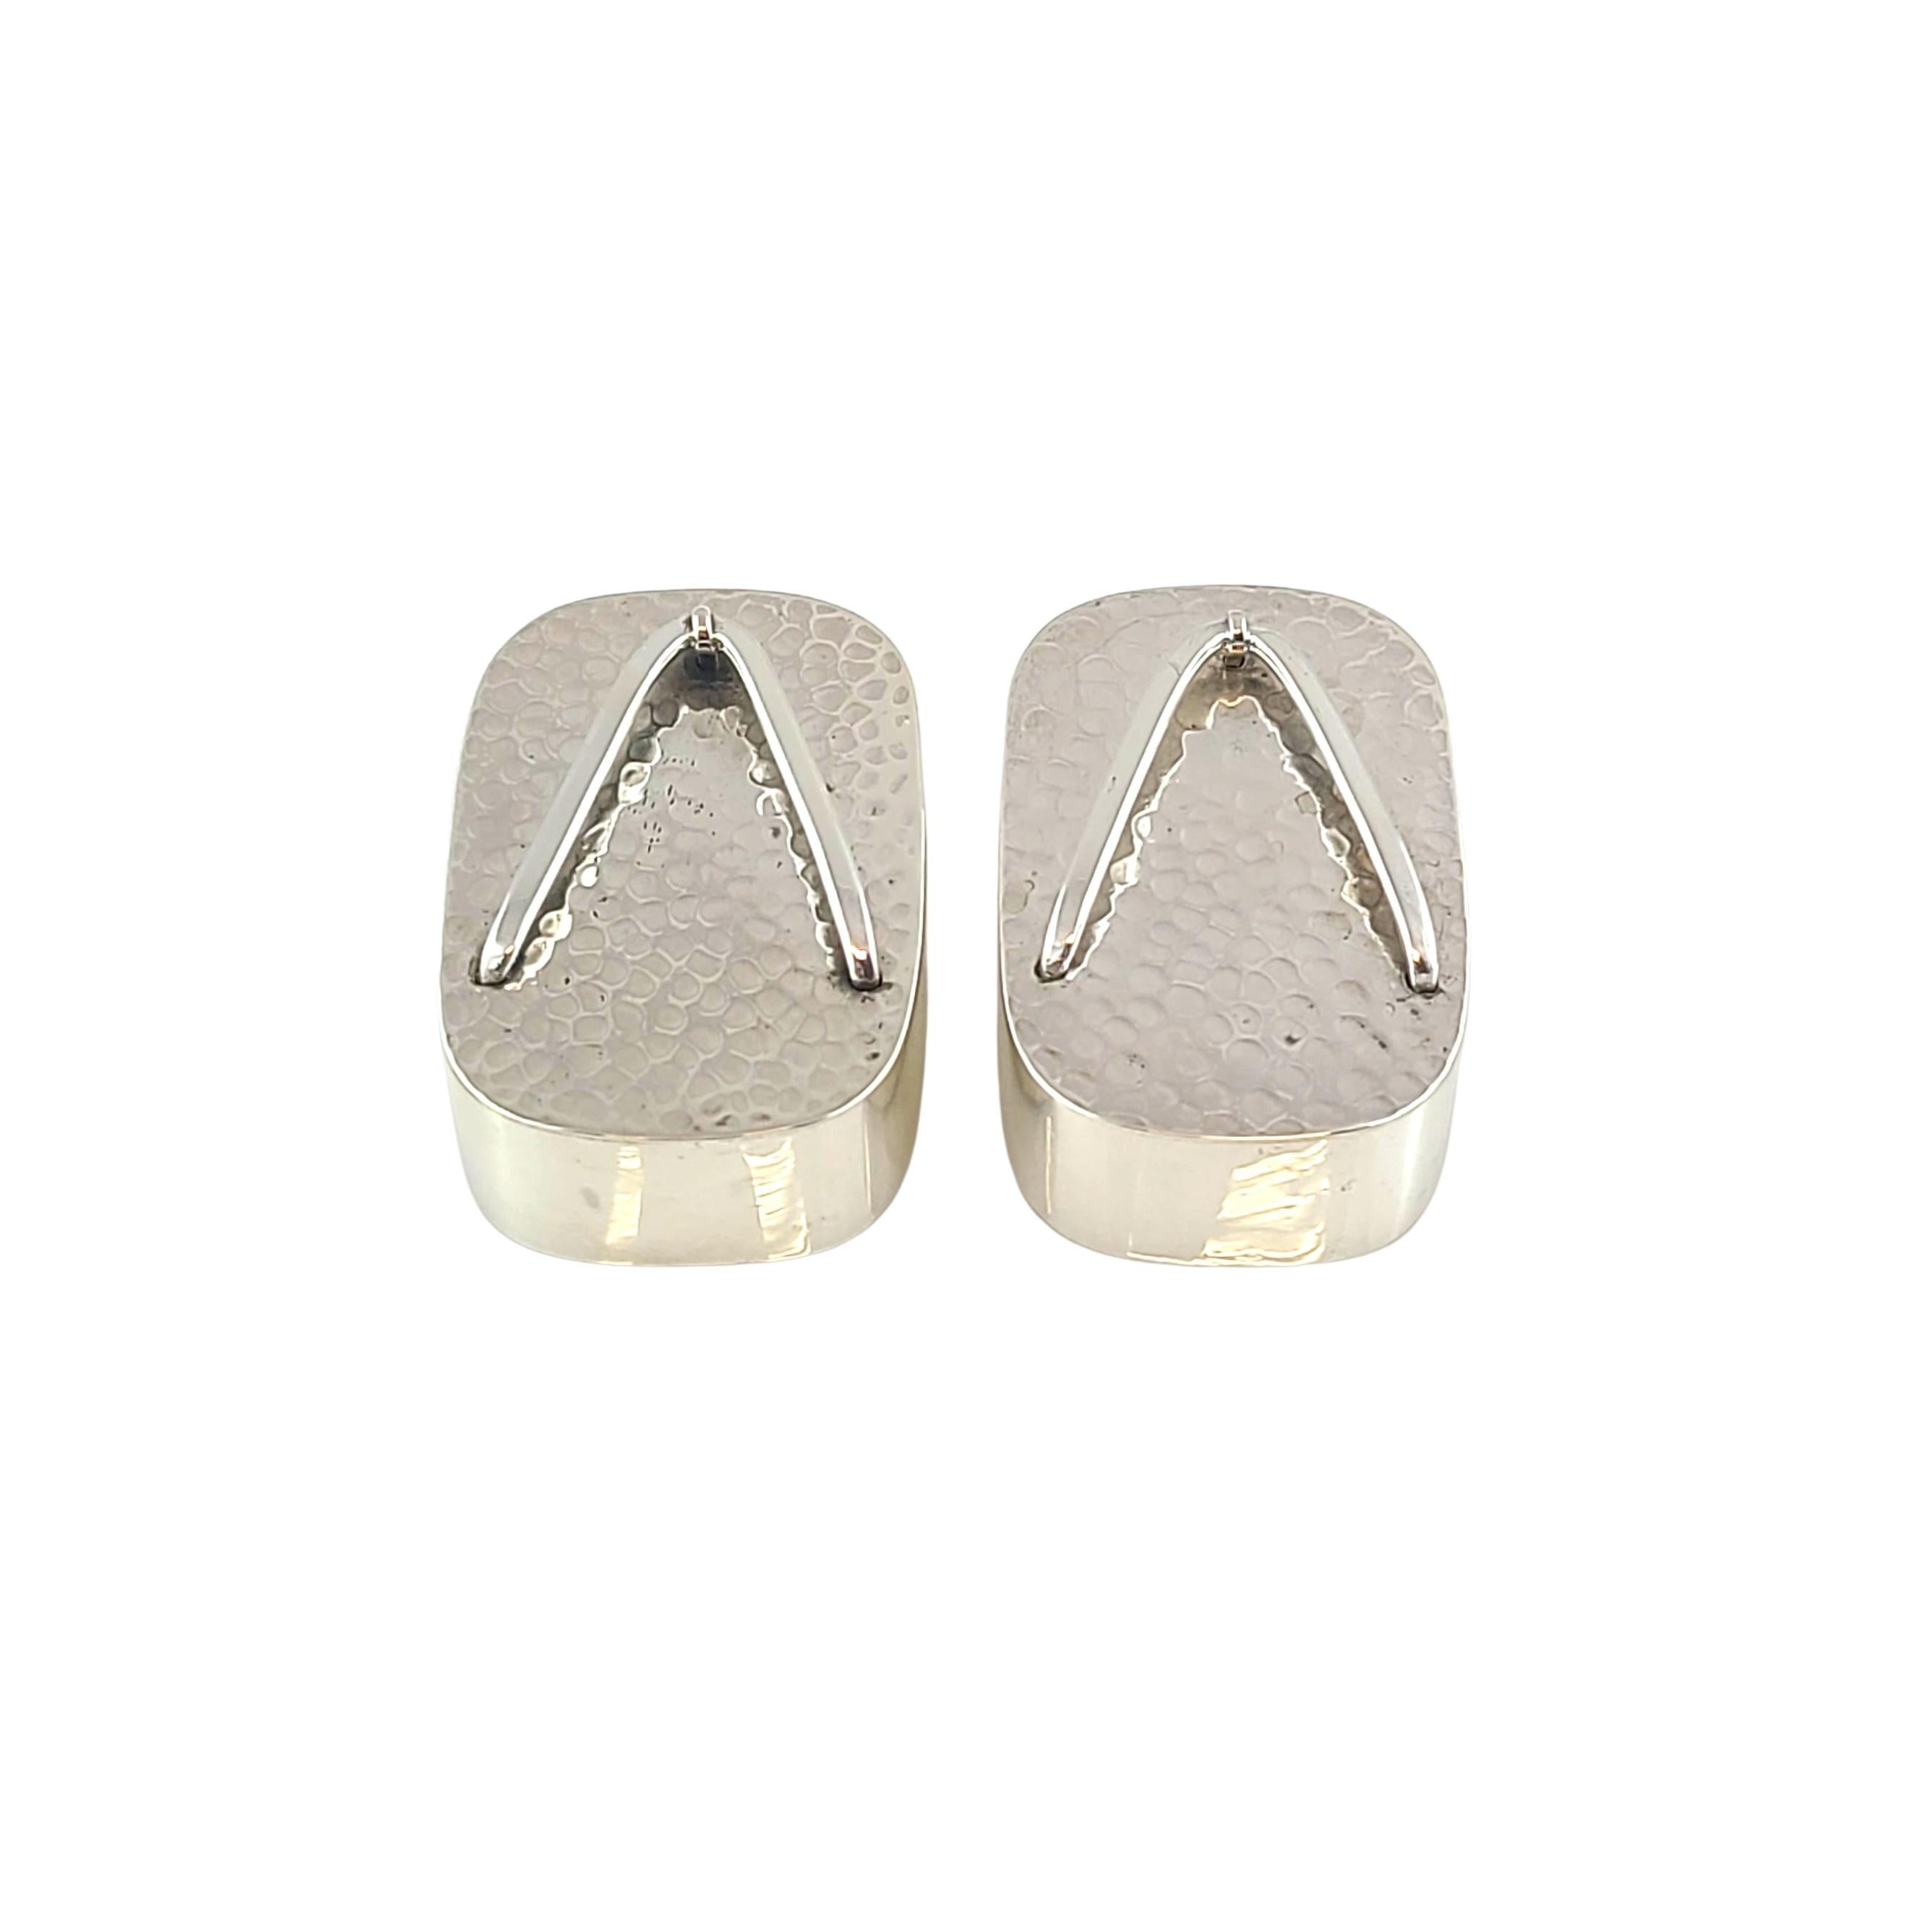 Japanese 950 Sterling Silver Geta Sandal Salt & Pepper Shakers In Good Condition In Washington Depot, CT